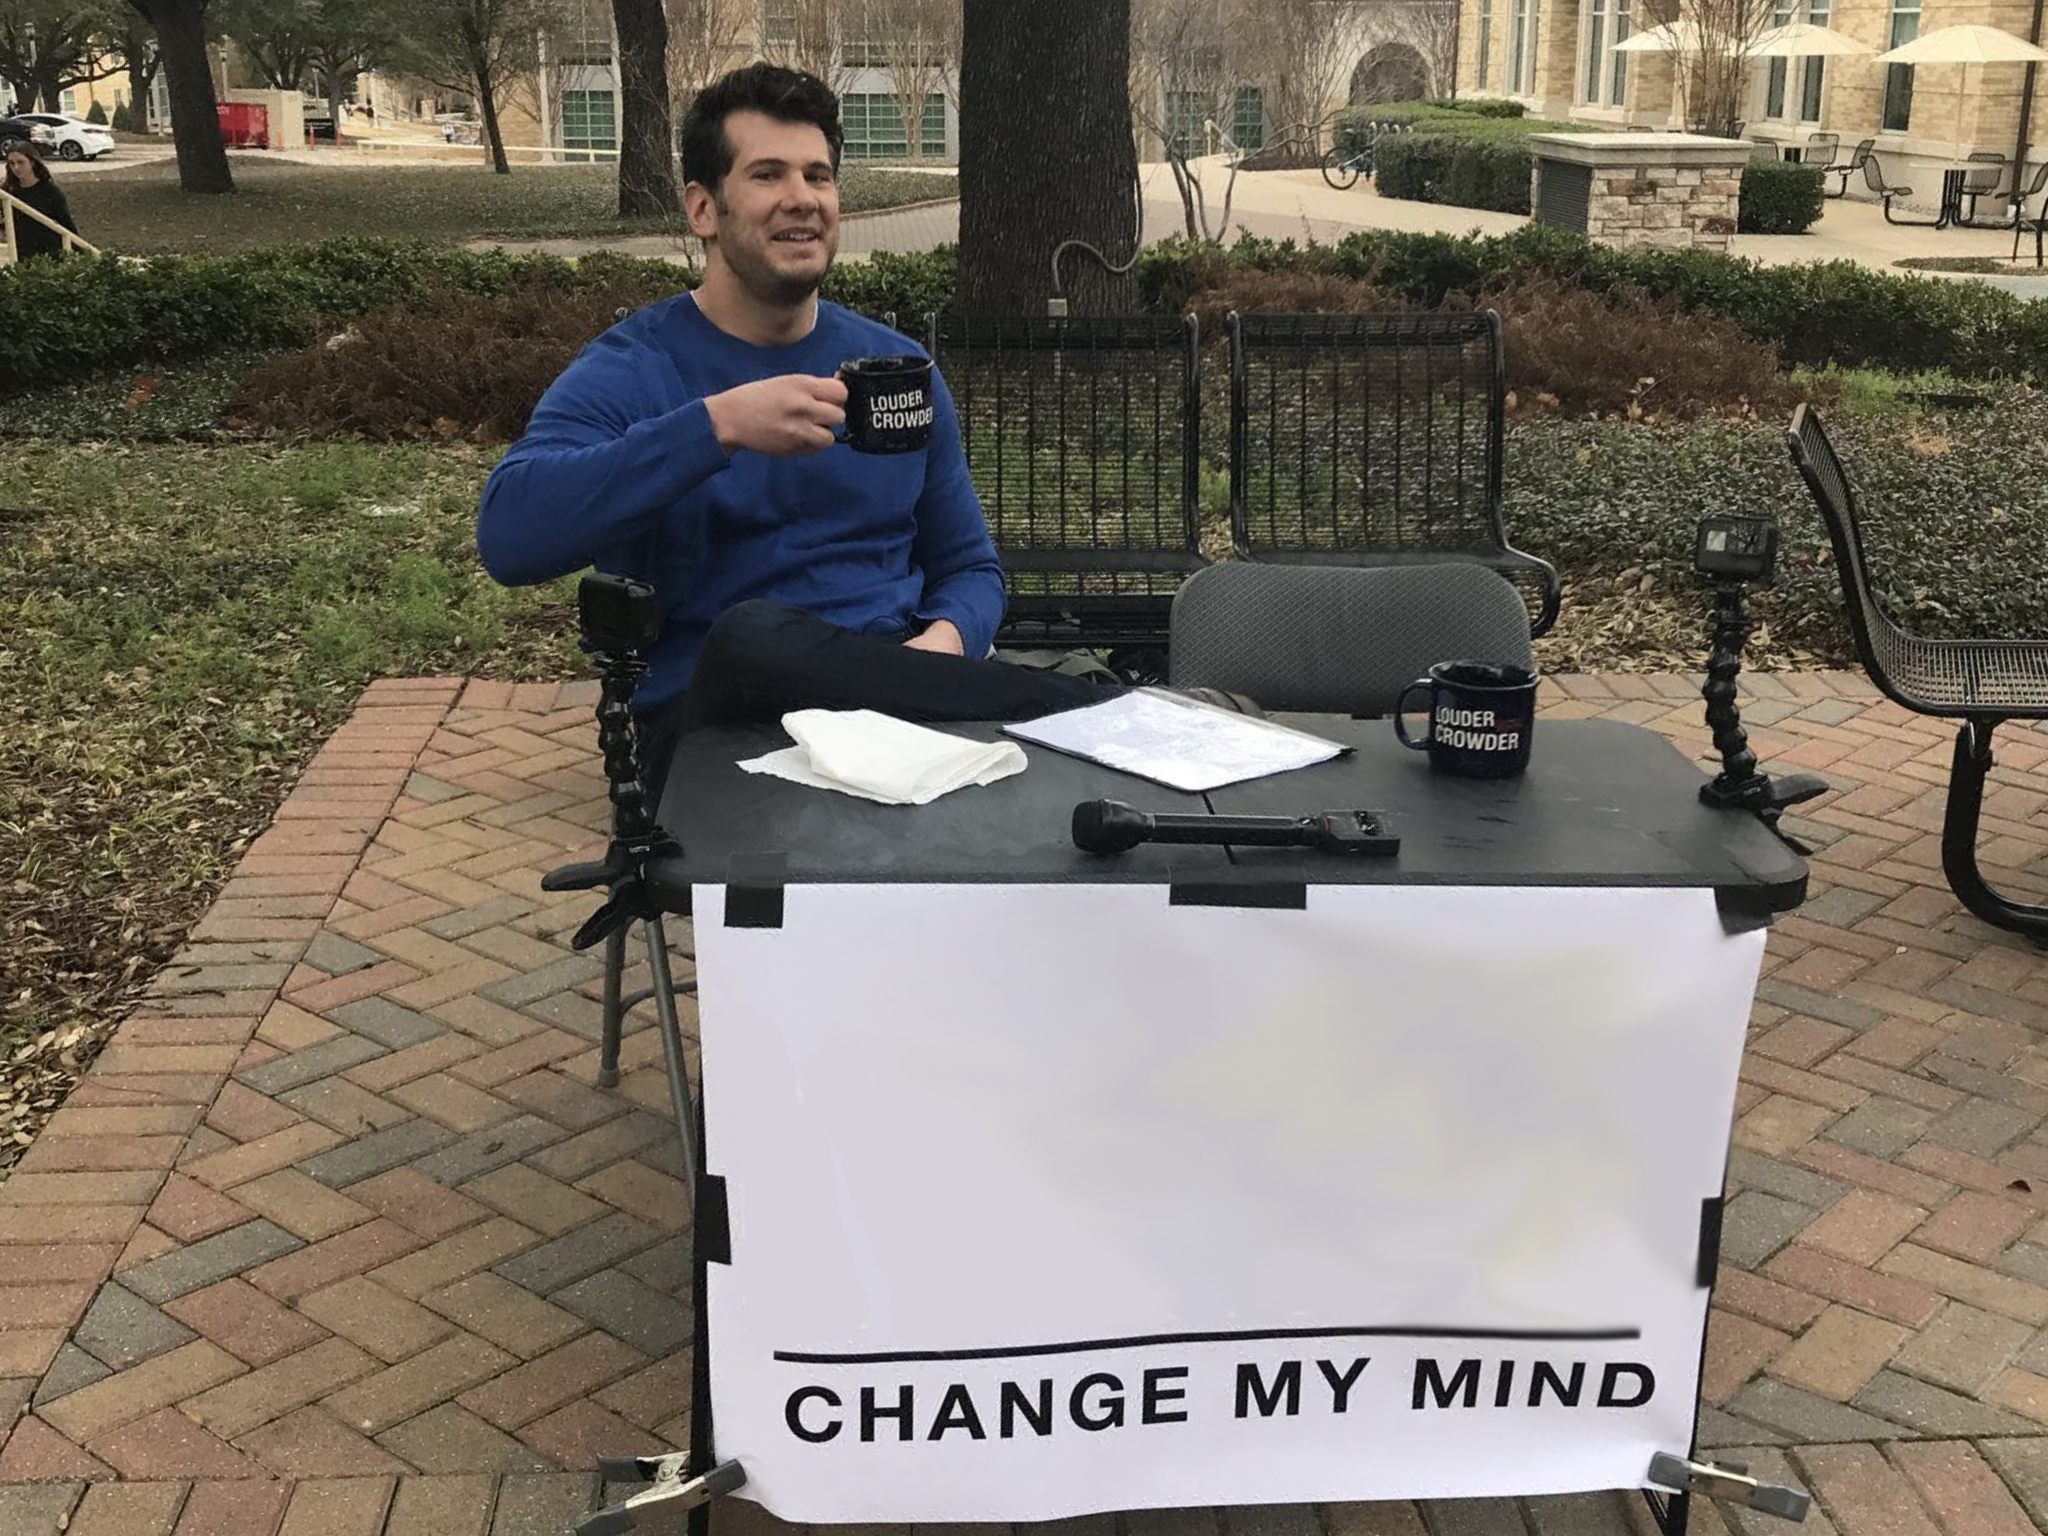 Change My Mind Empty Template - Horizontal - Steven Crowder, Campus Sign.png